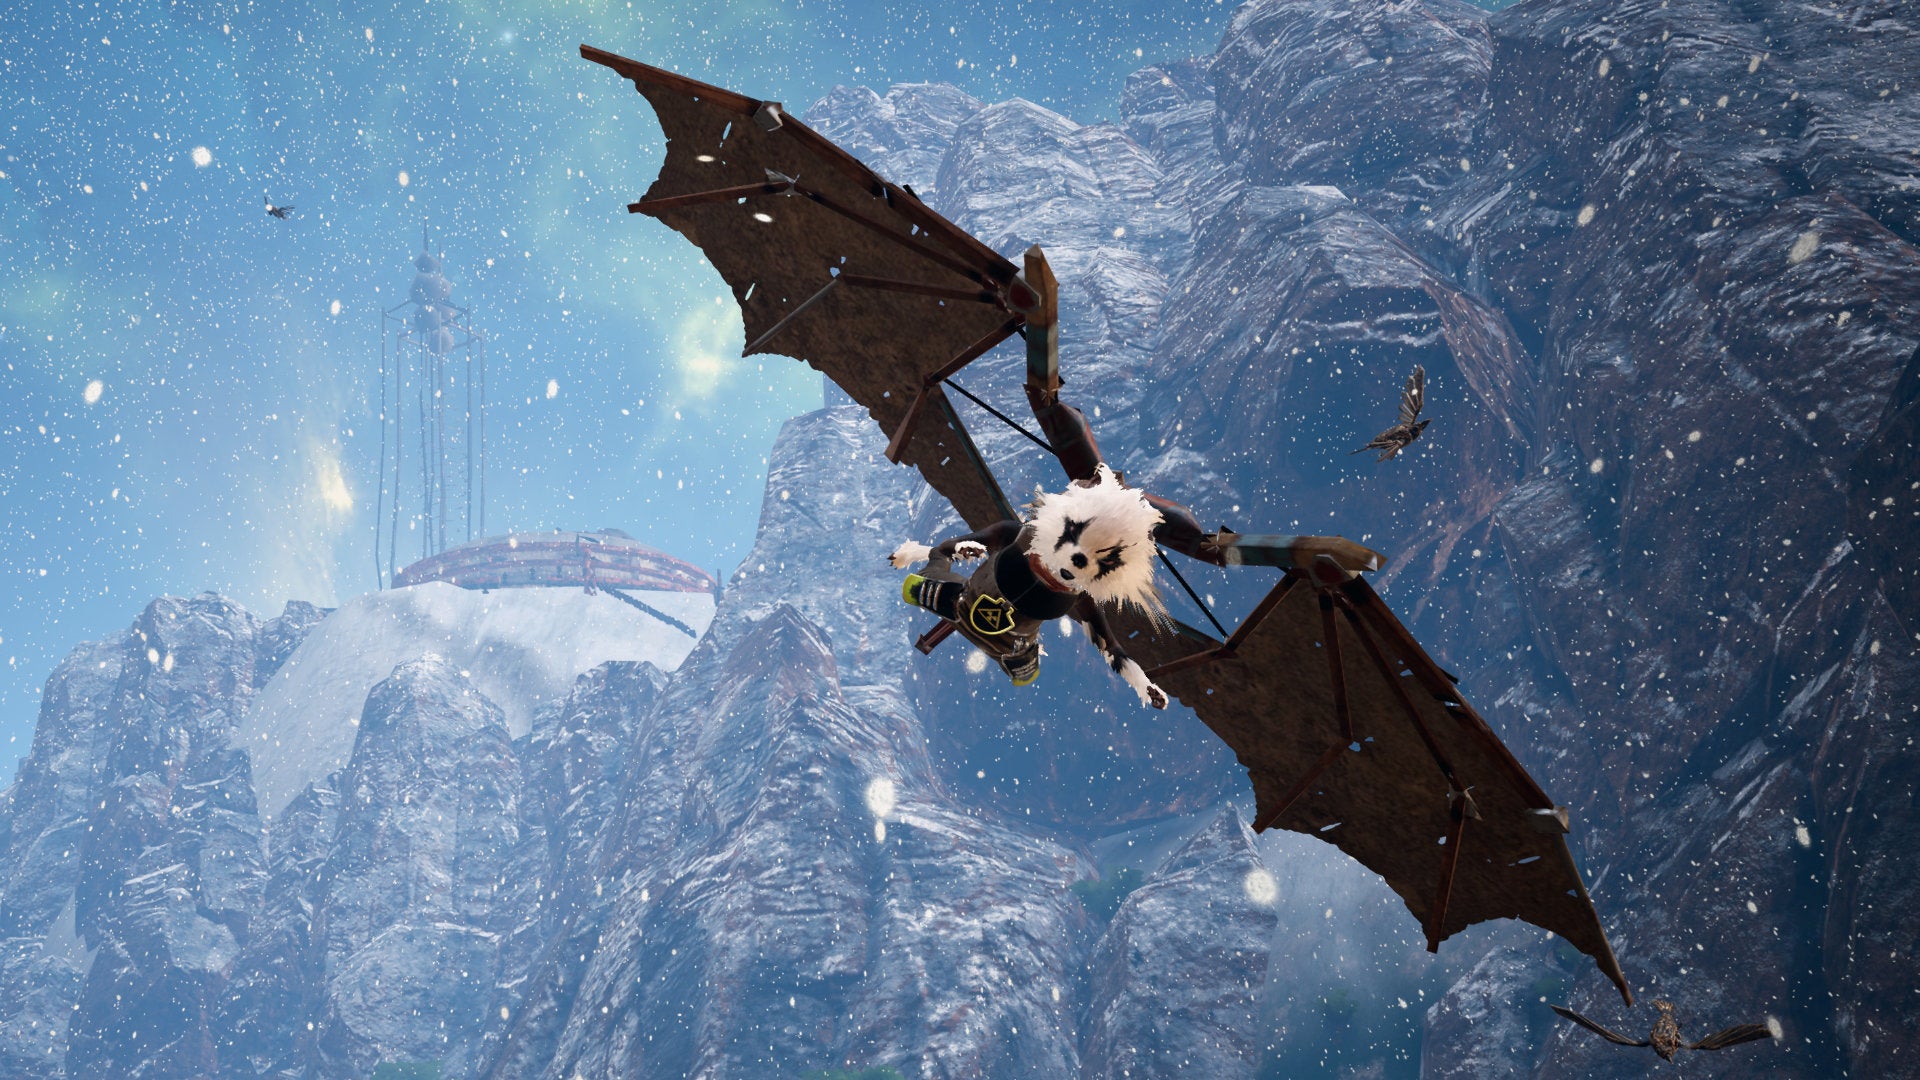 A Biomutant screenshot of the main character using wings to glide down from a mountaintop.